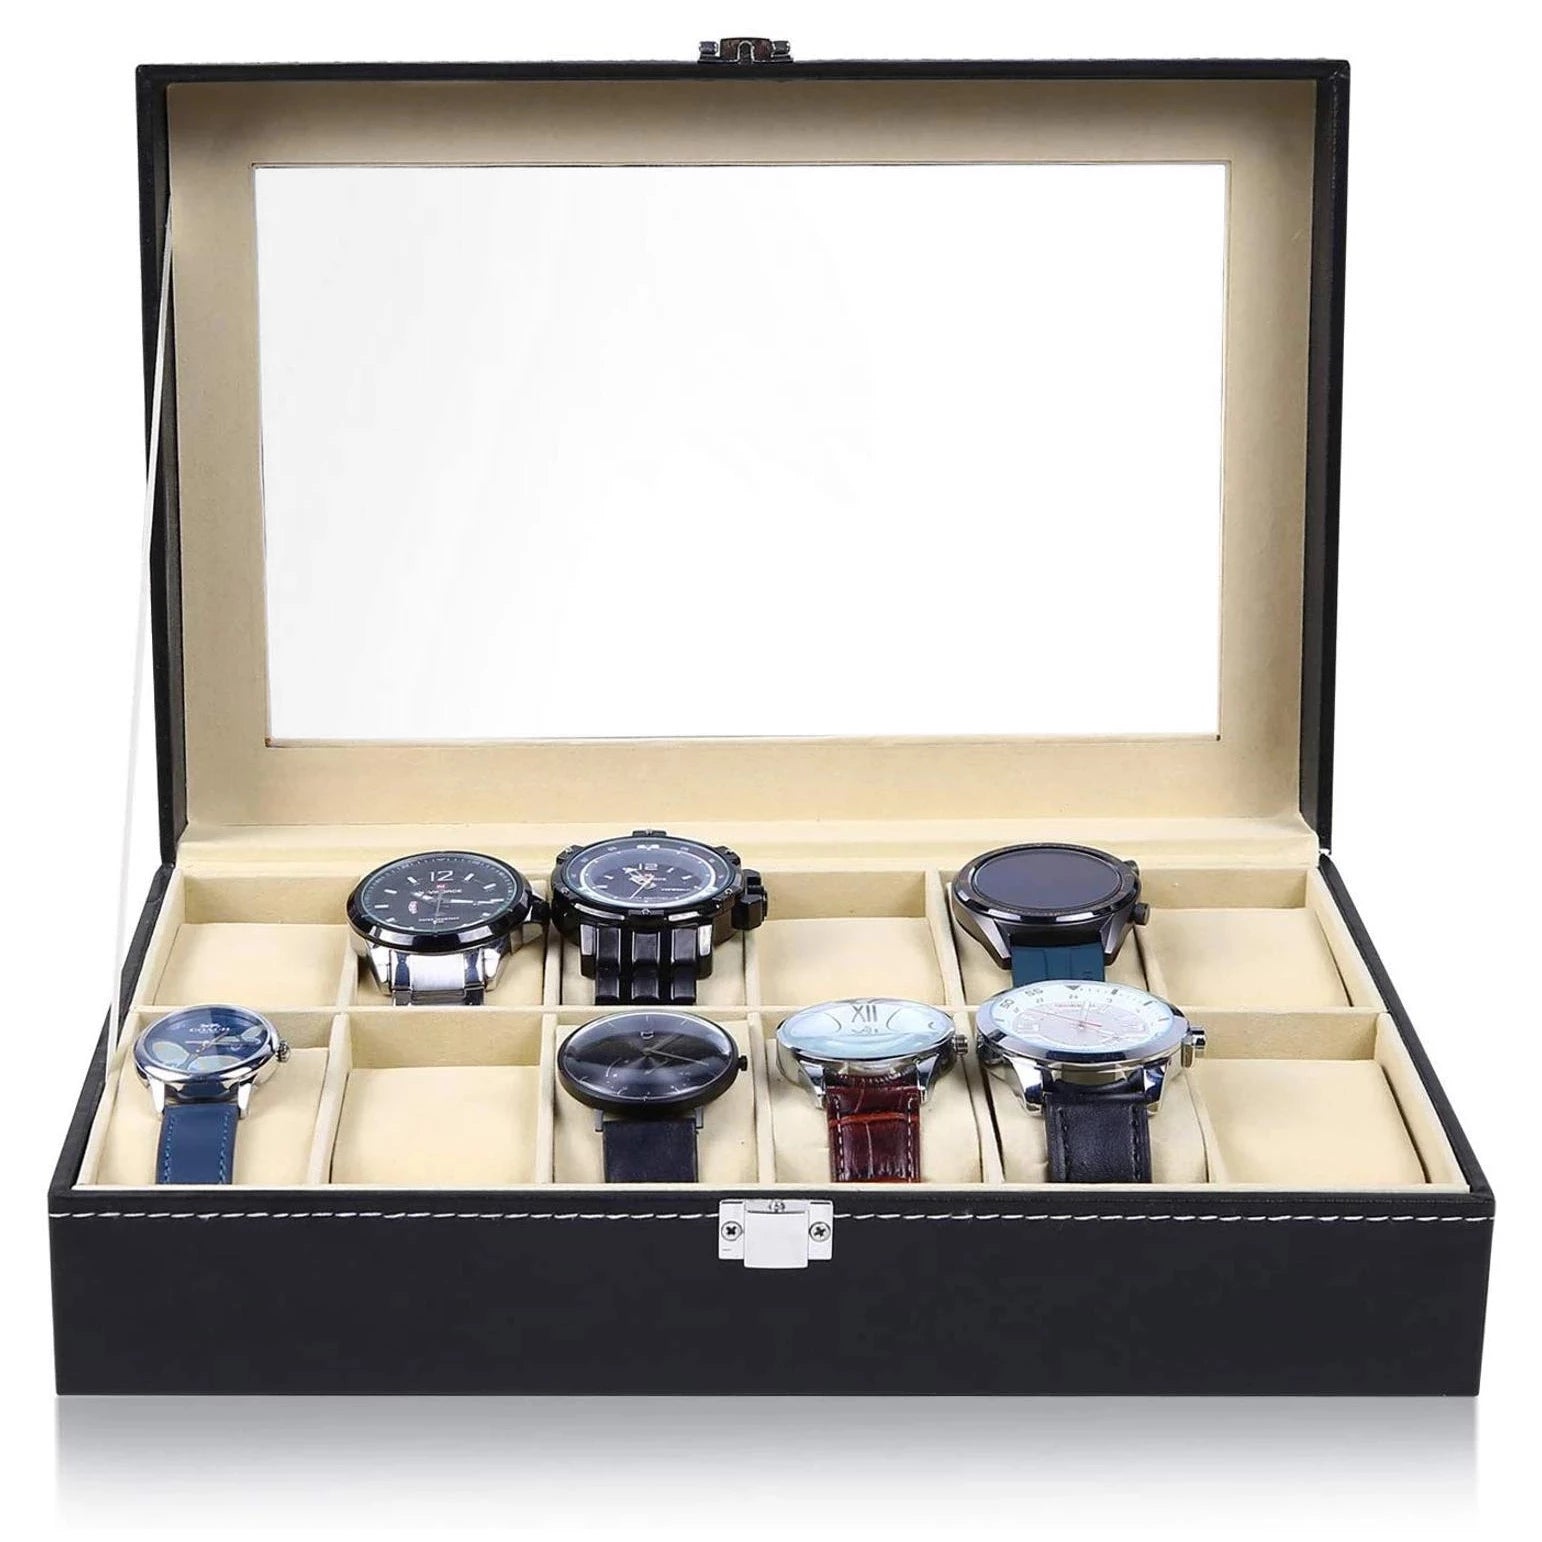 12 Grid Watch organzier in rectagular shape in best quality leather material.